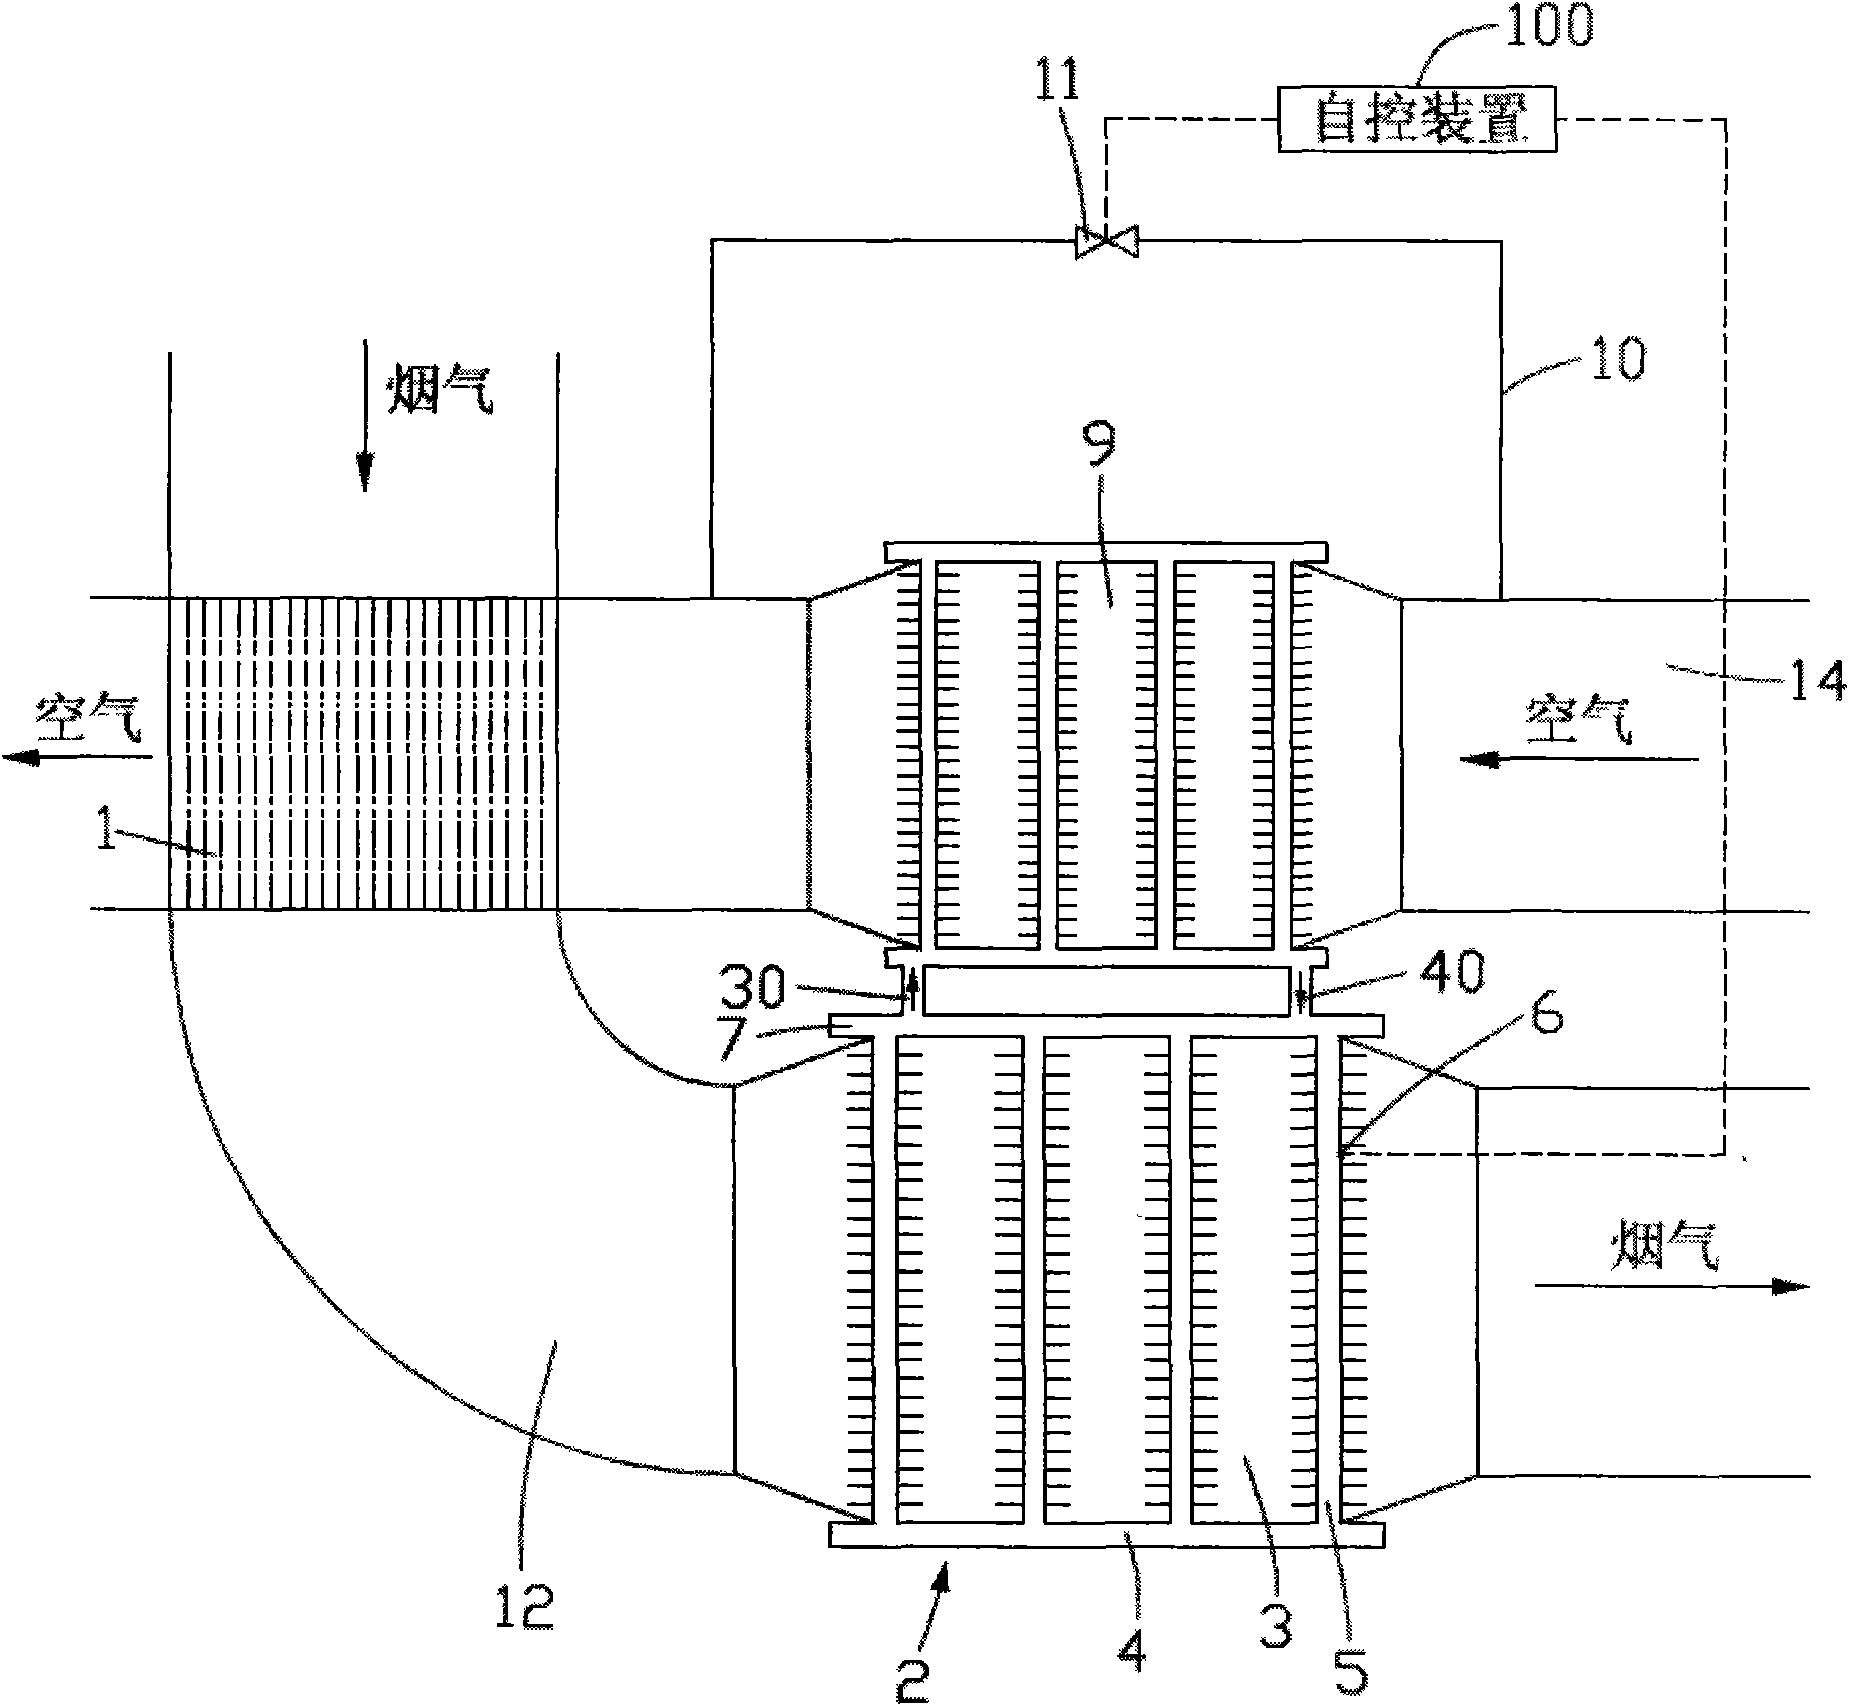 Flue-gas waste heat reclaiming system